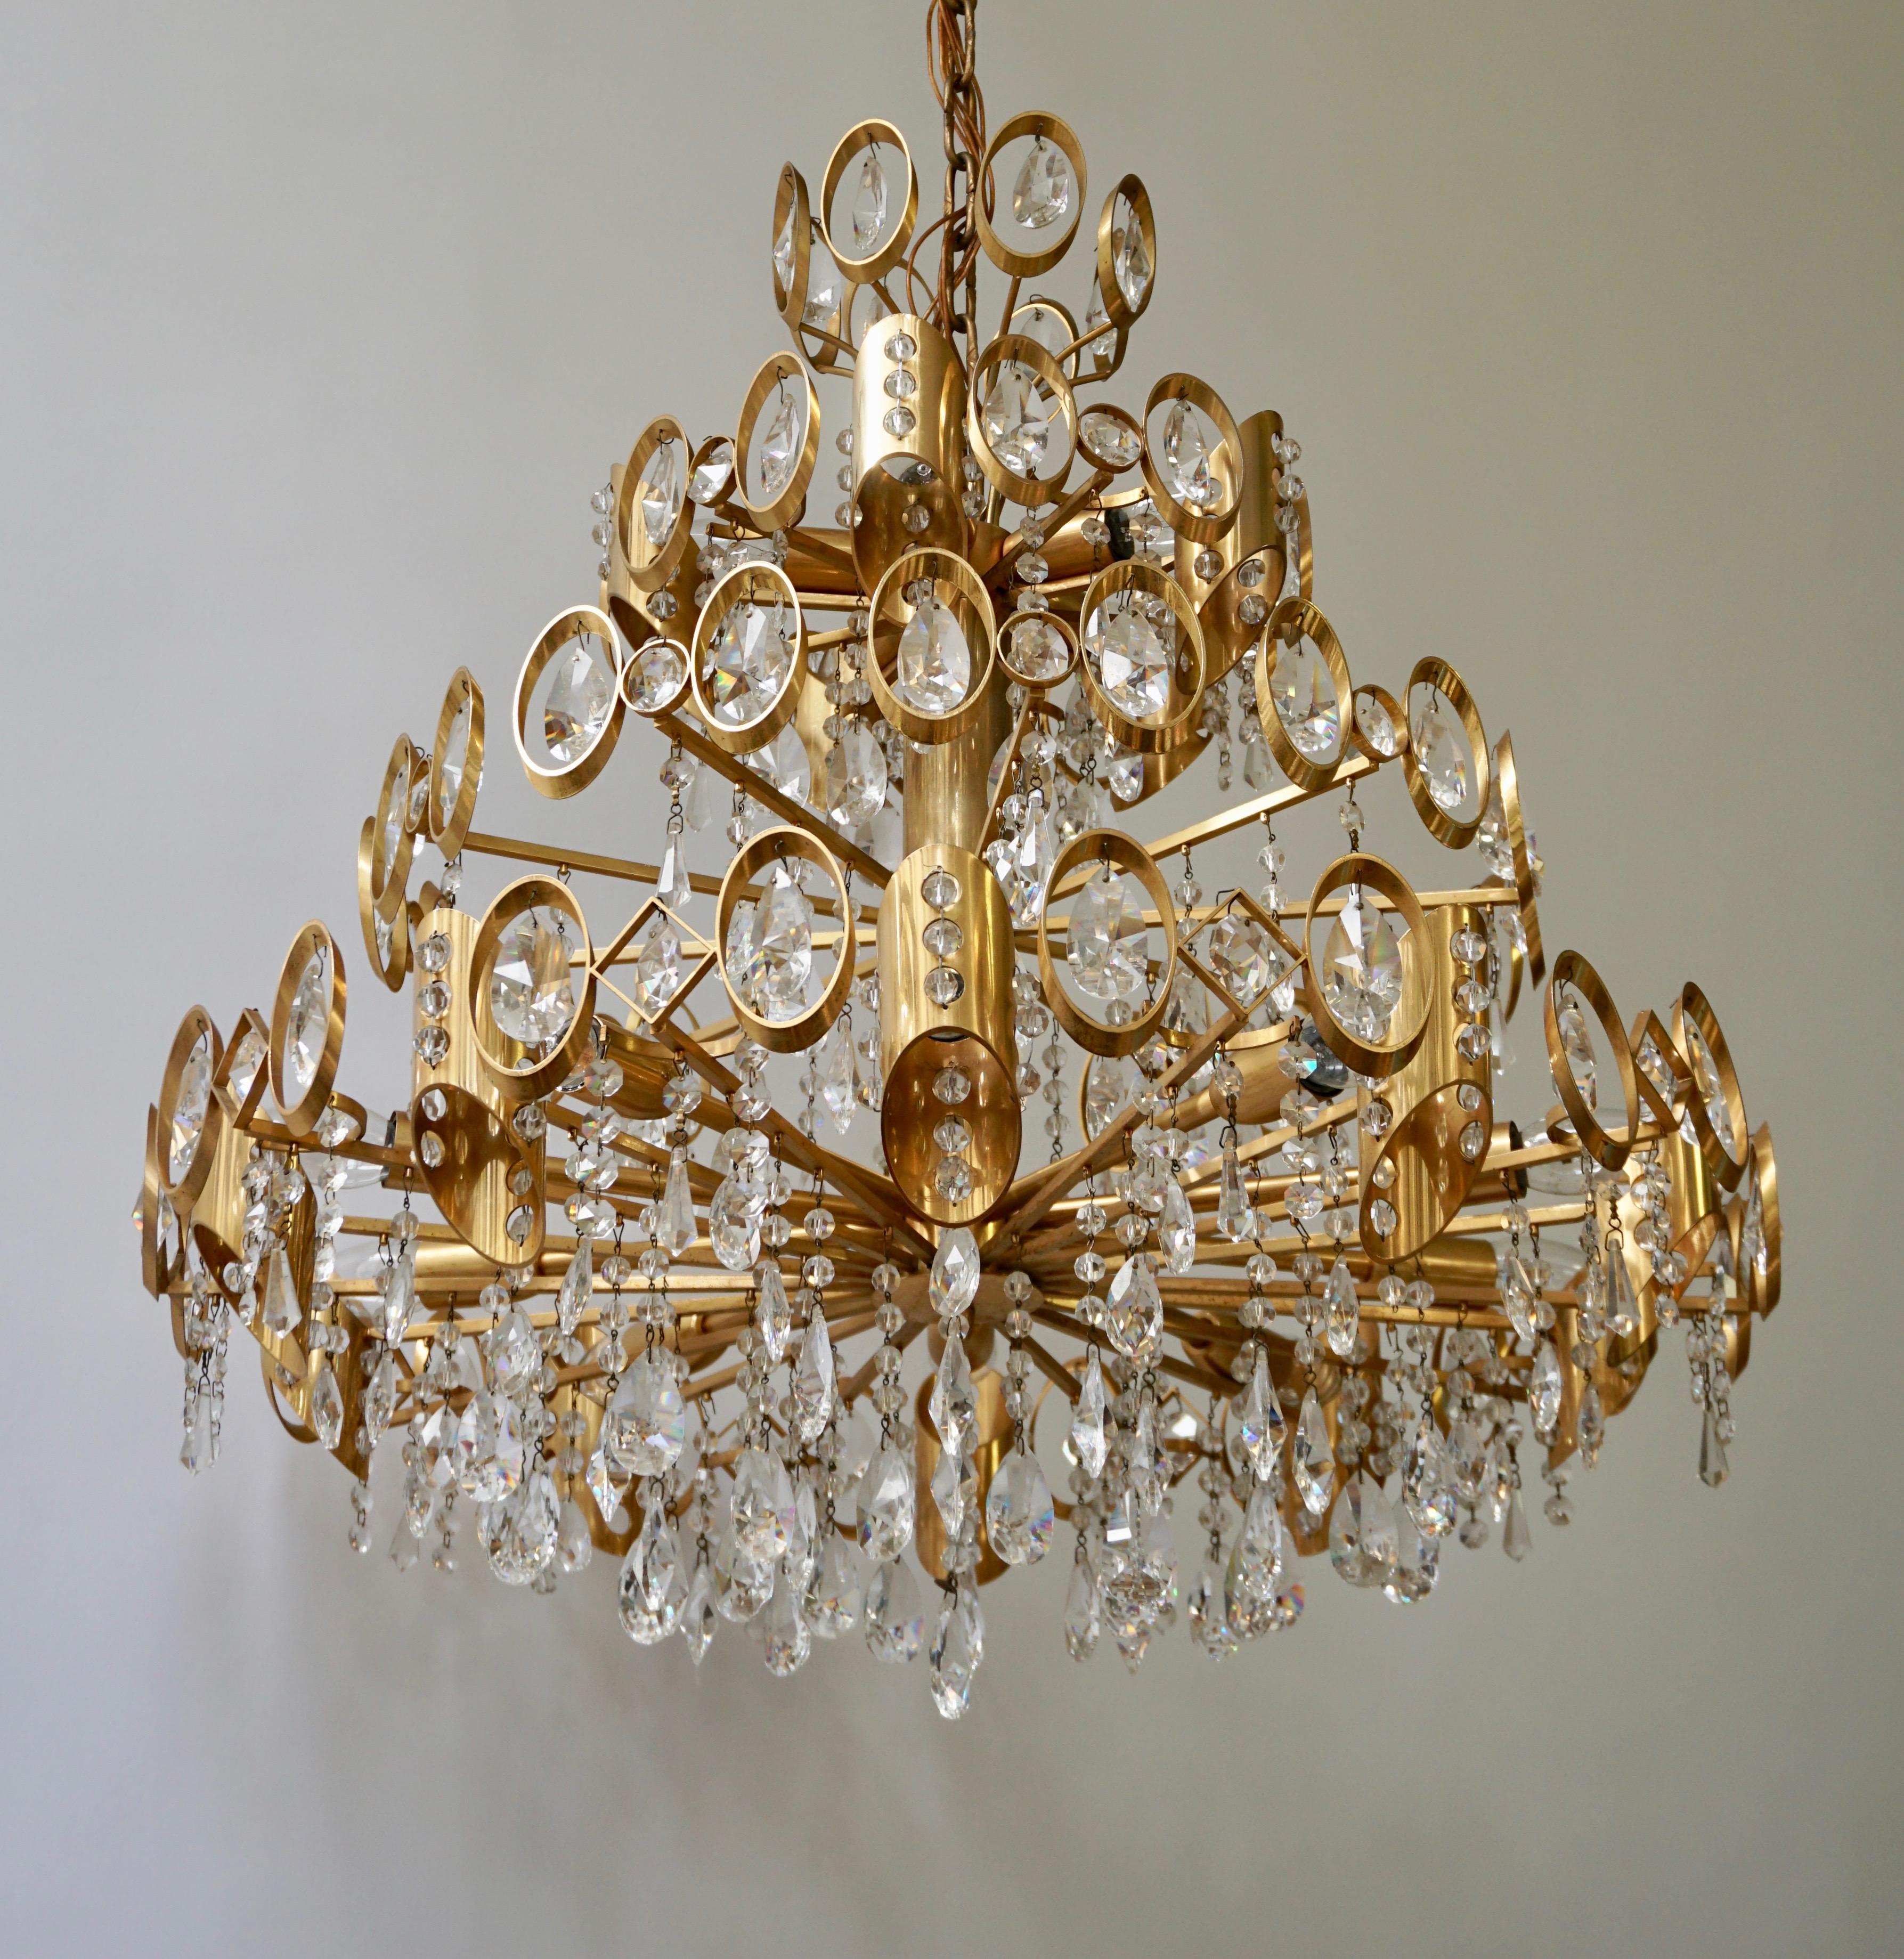 Stunning large Hollywood Regency Palwa chandelier with a gilt brass frame and chain with faceted crystal embellishment suspended within the frame by Palwa.
Fixture has 15 E14 light sources.
Chandelier body measures 27 inches in diameter x 27